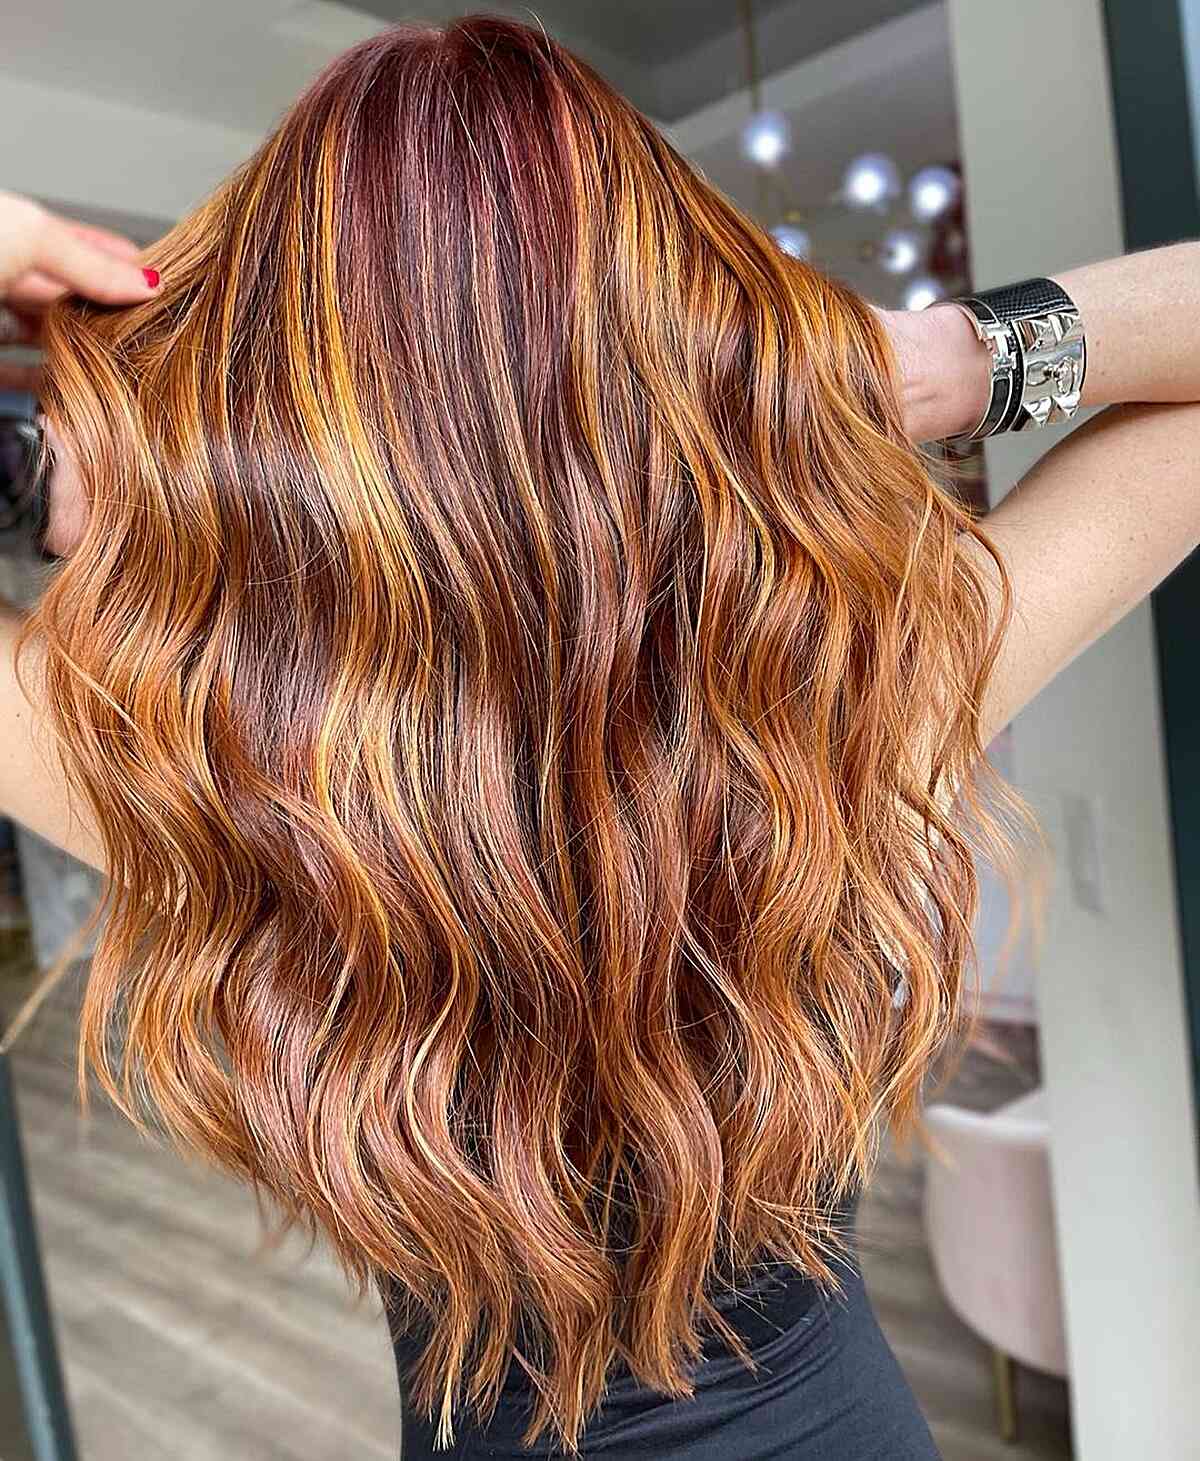 Lived-In Red Hair and Blonde Highlights Hairstyle for women with long hair